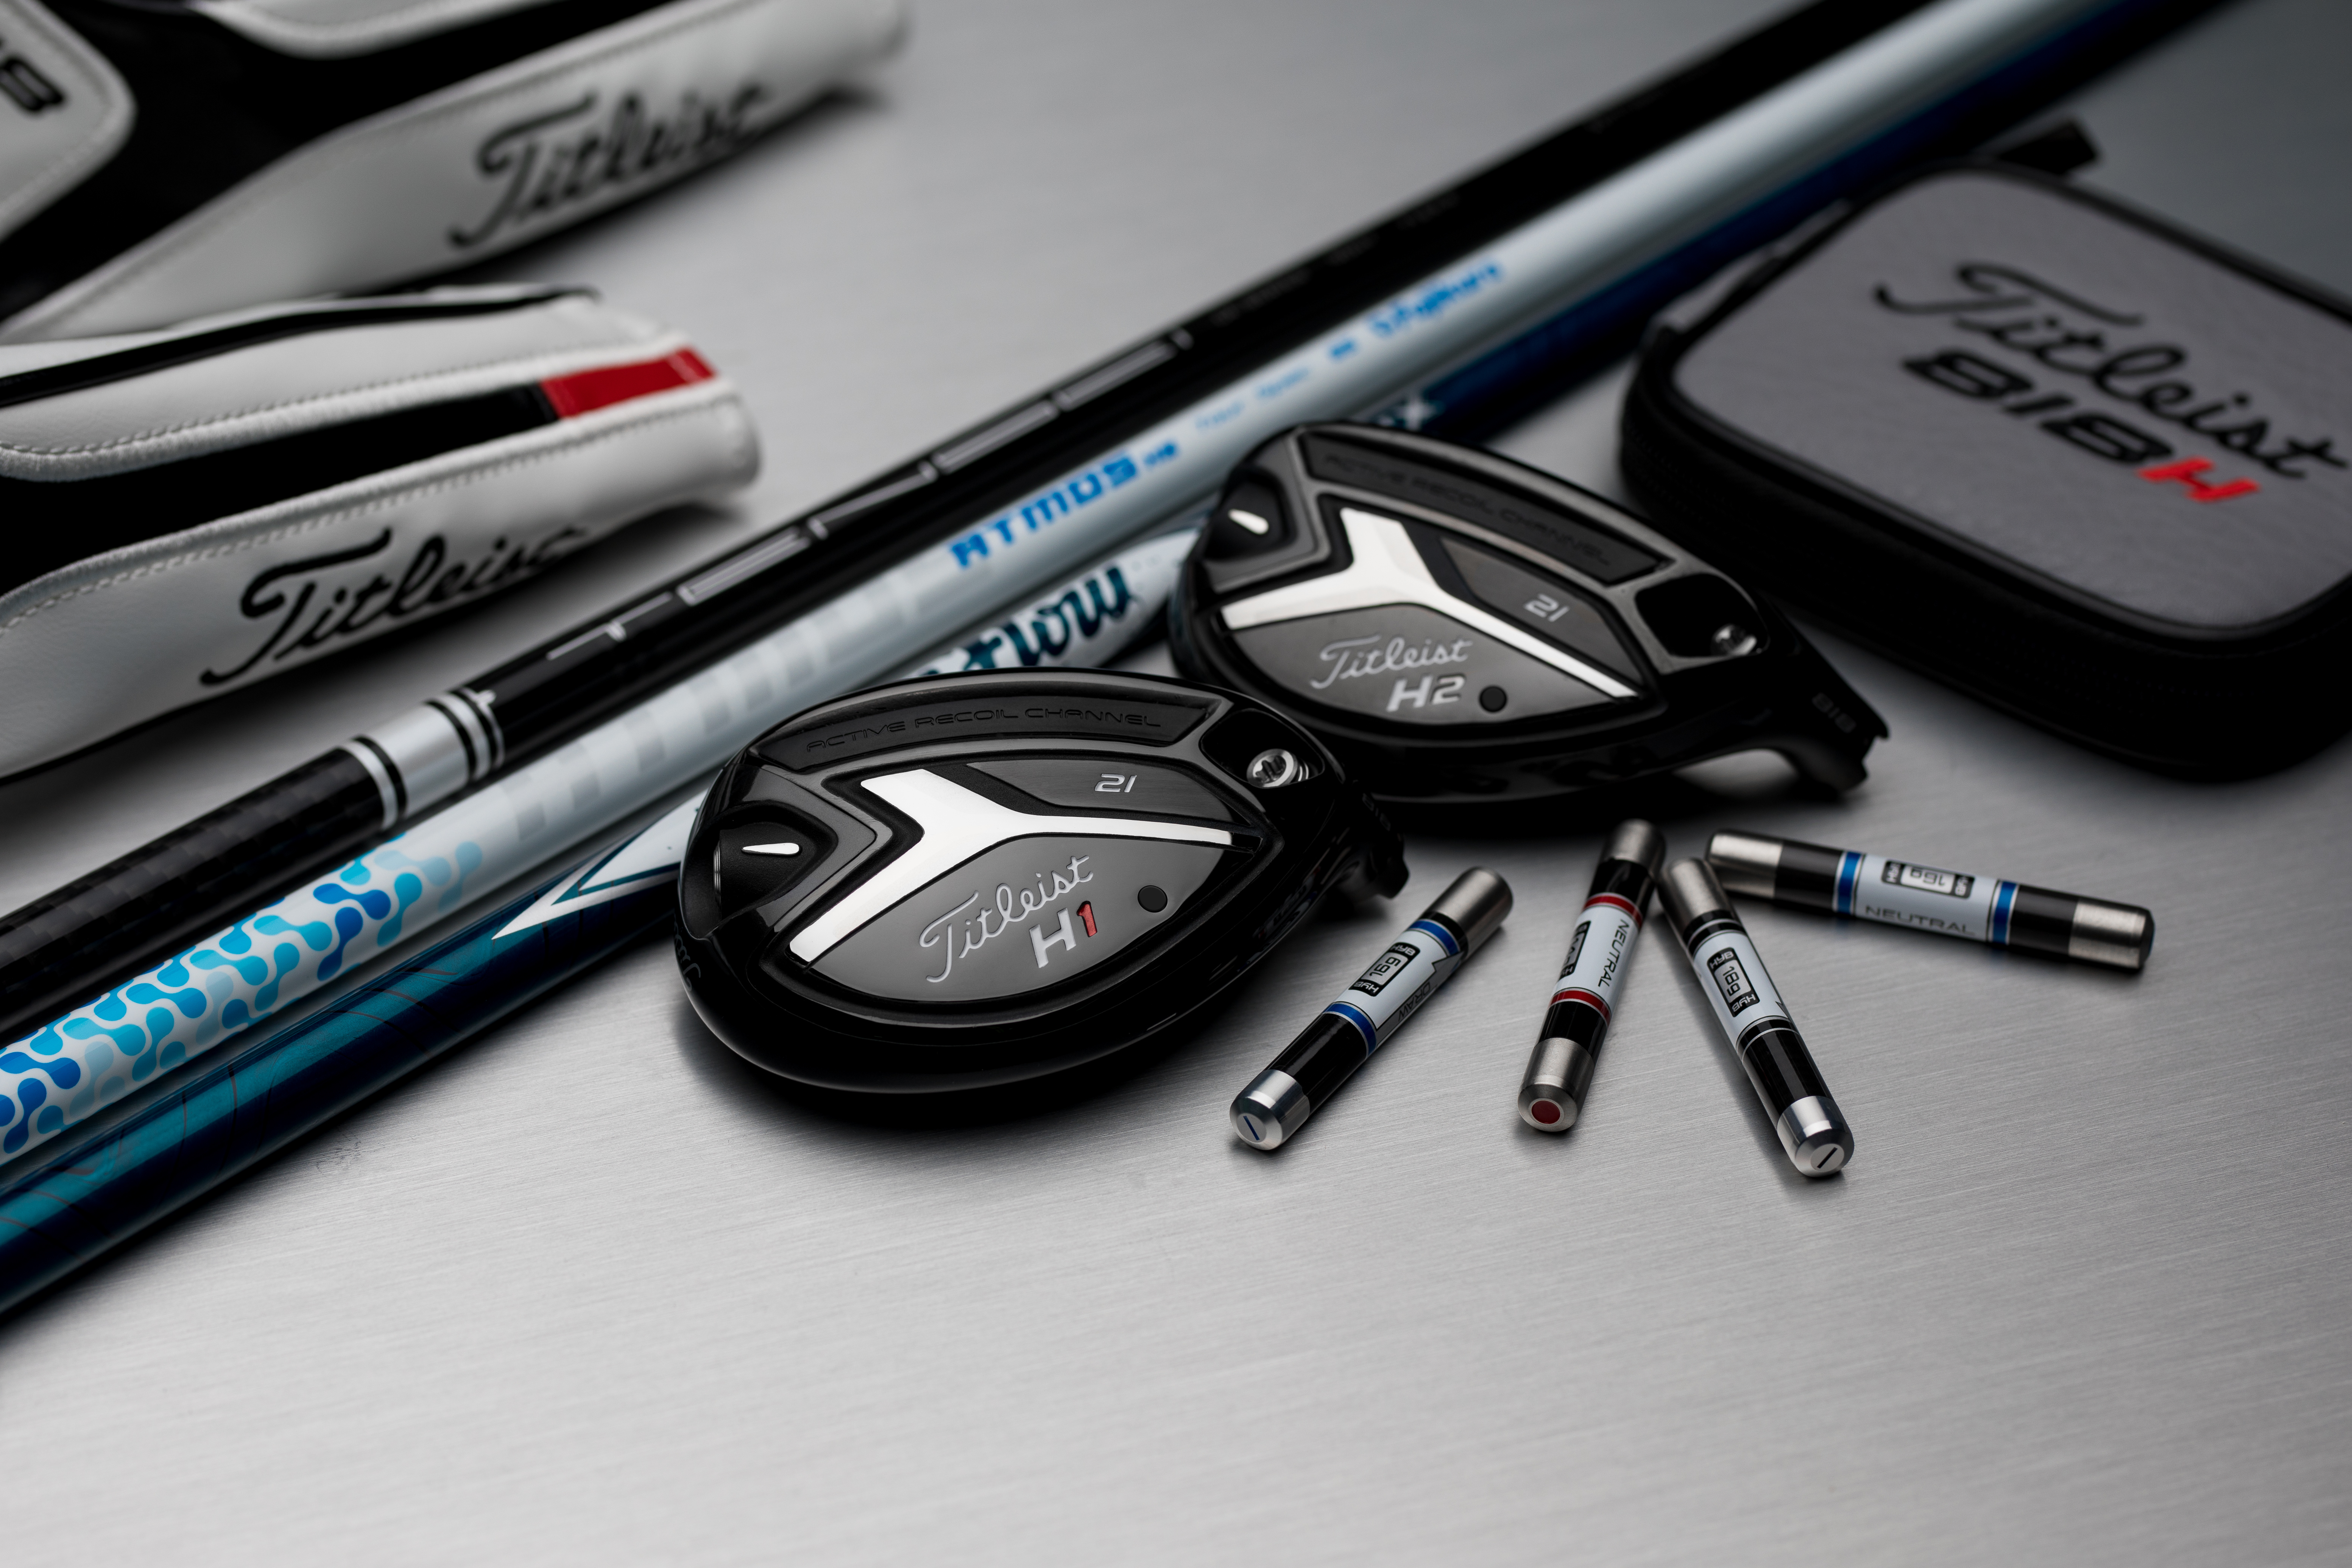 New Titleist 818 hybrids offer forgiveness, launch and shotmaking